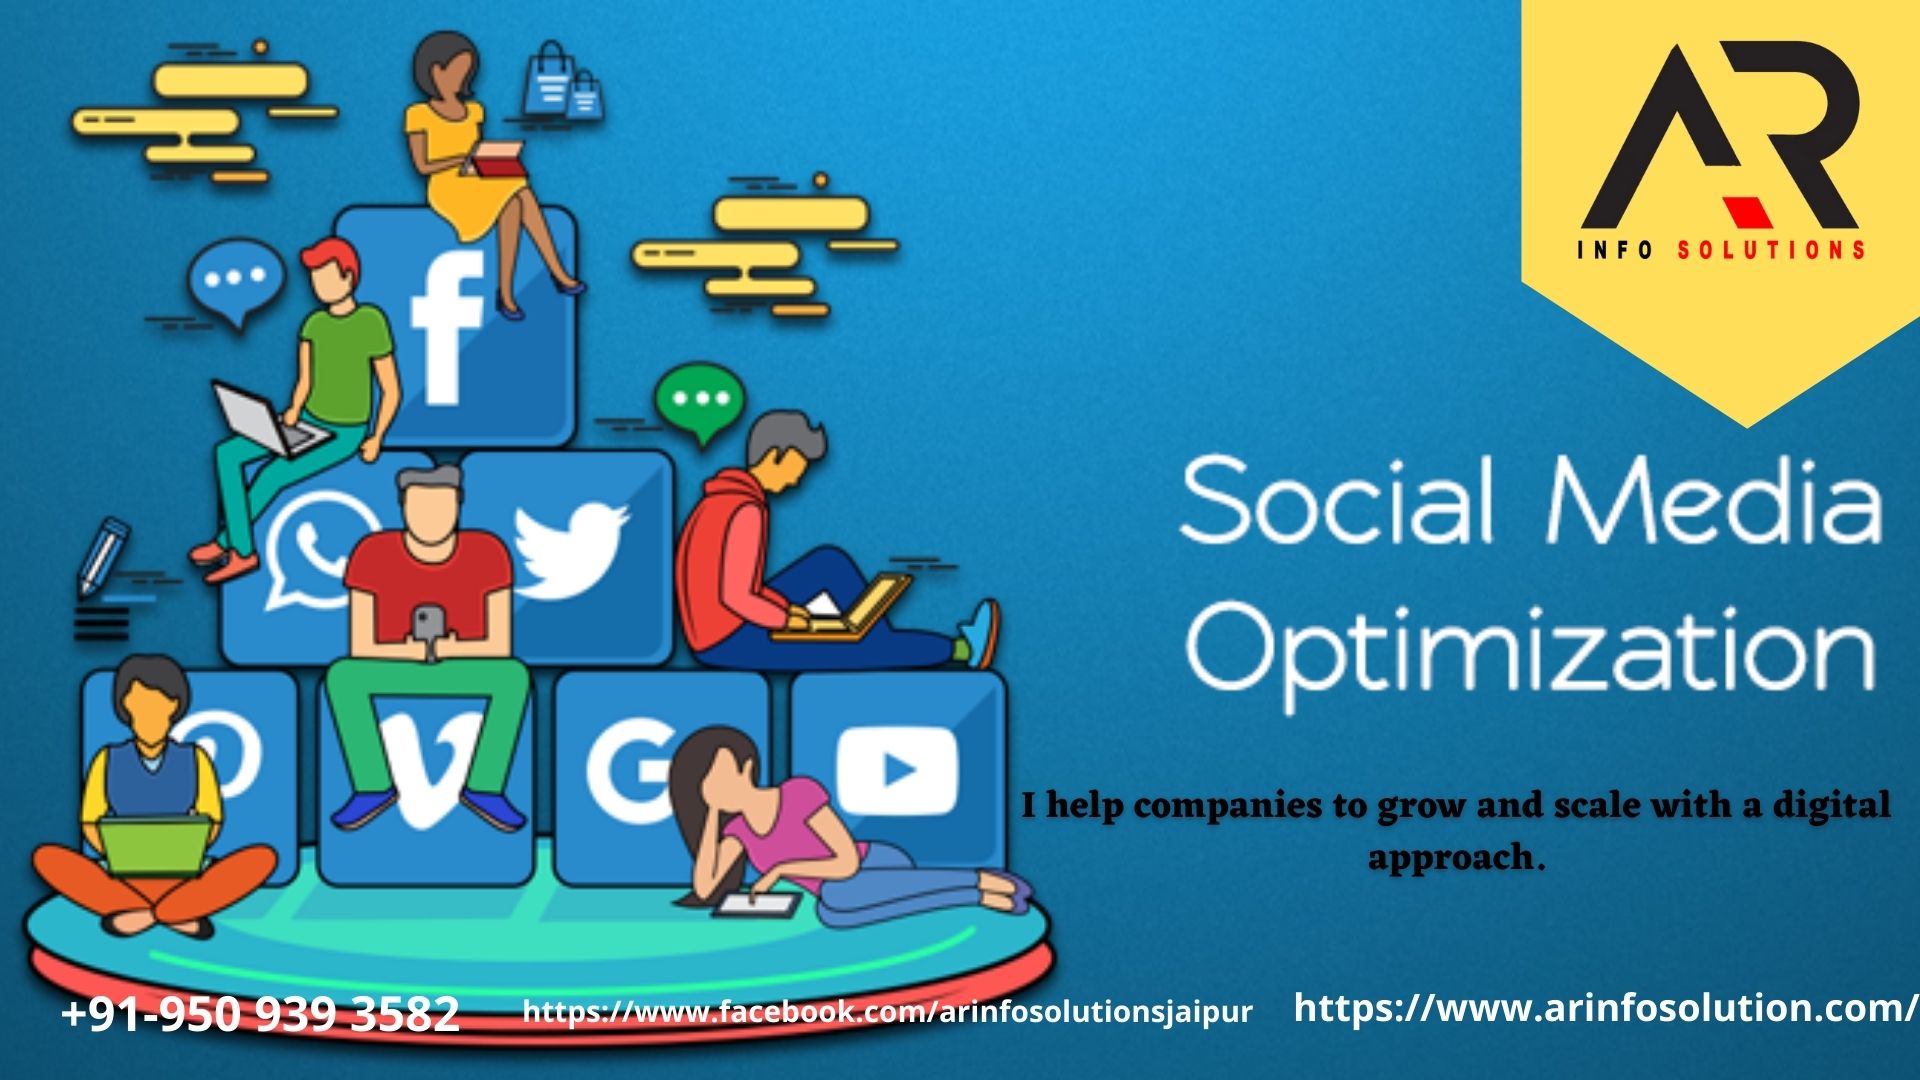 WHAT IS SOCIAL MEDIA OPTIMIZATION?